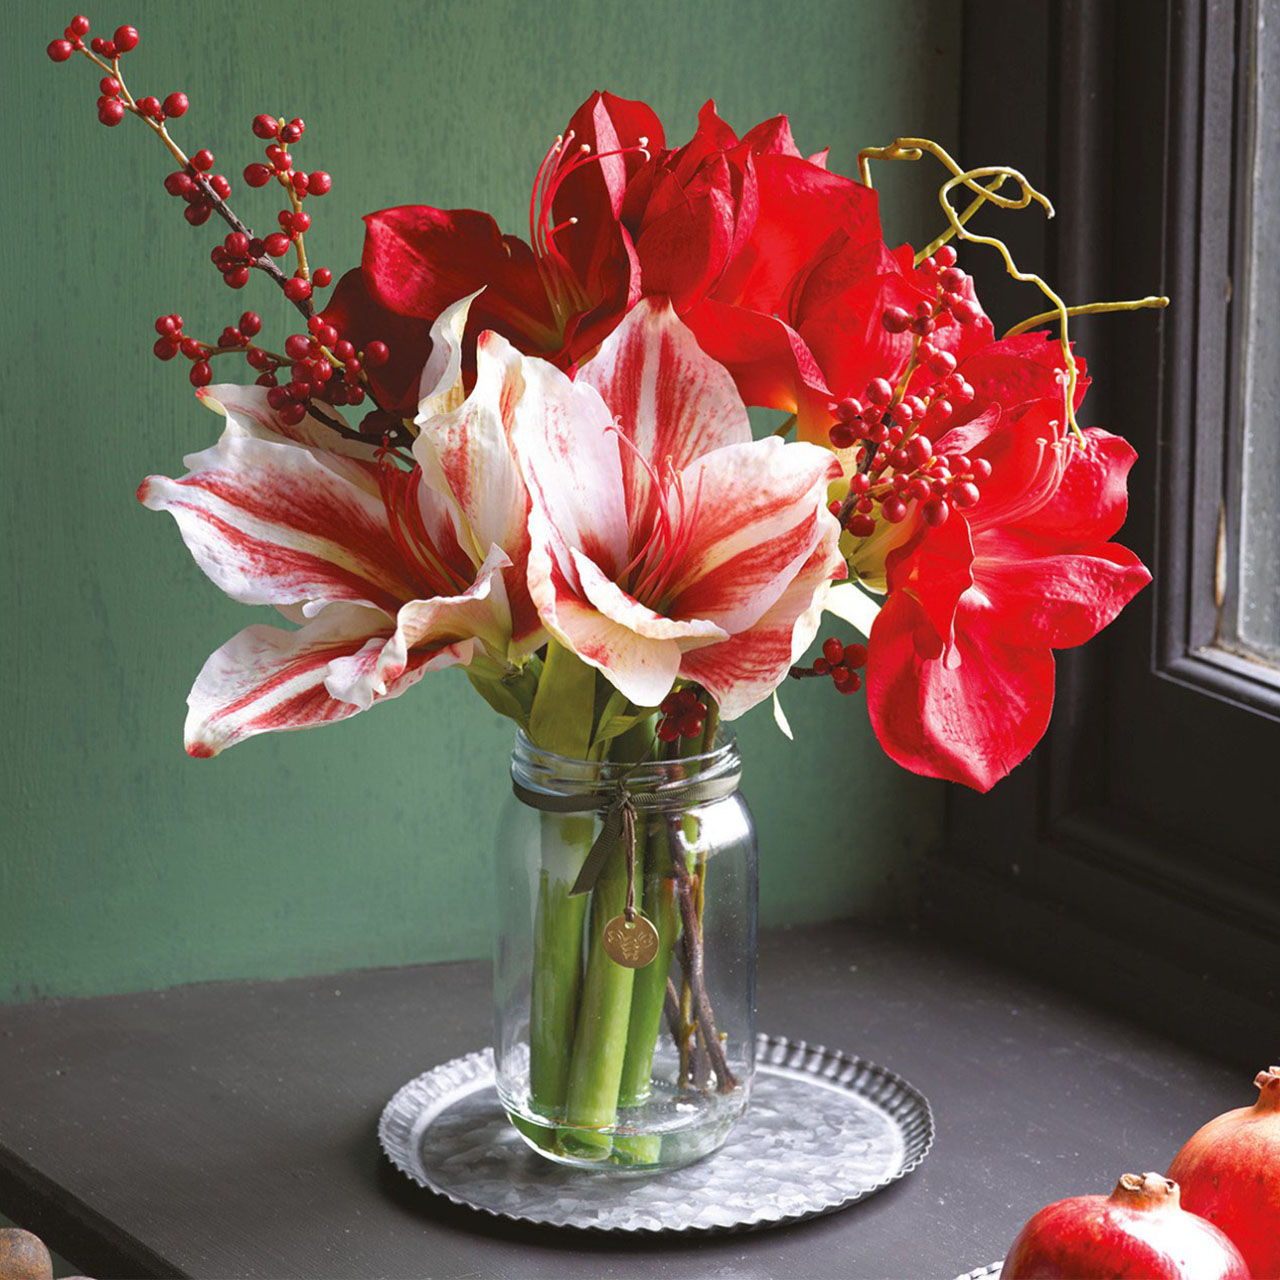 Amaryllis and Berry Centrepiece